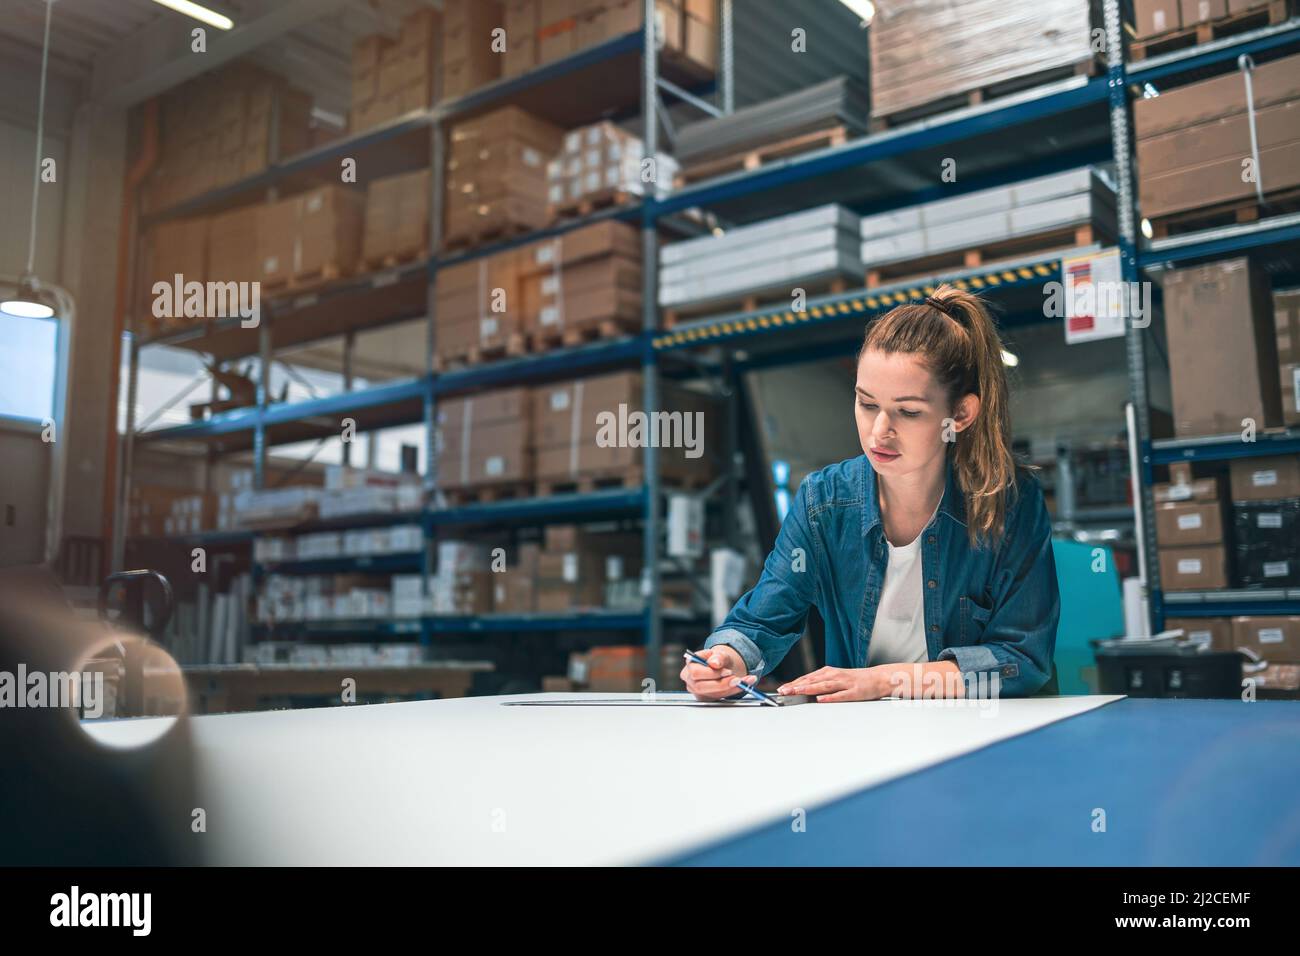 Young woman working in an industrial place of work Stock Photo